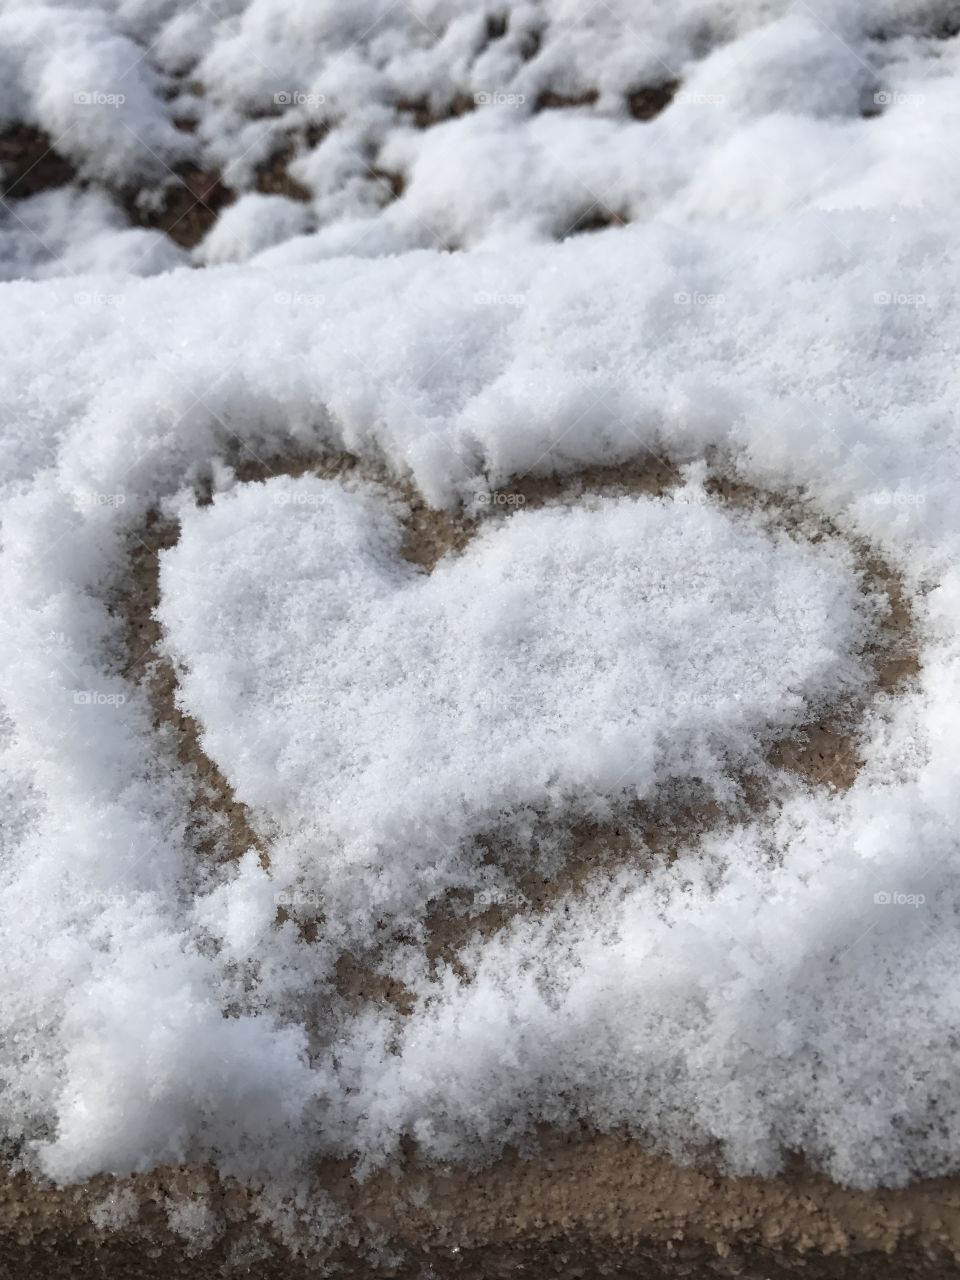 Love is in the snow!